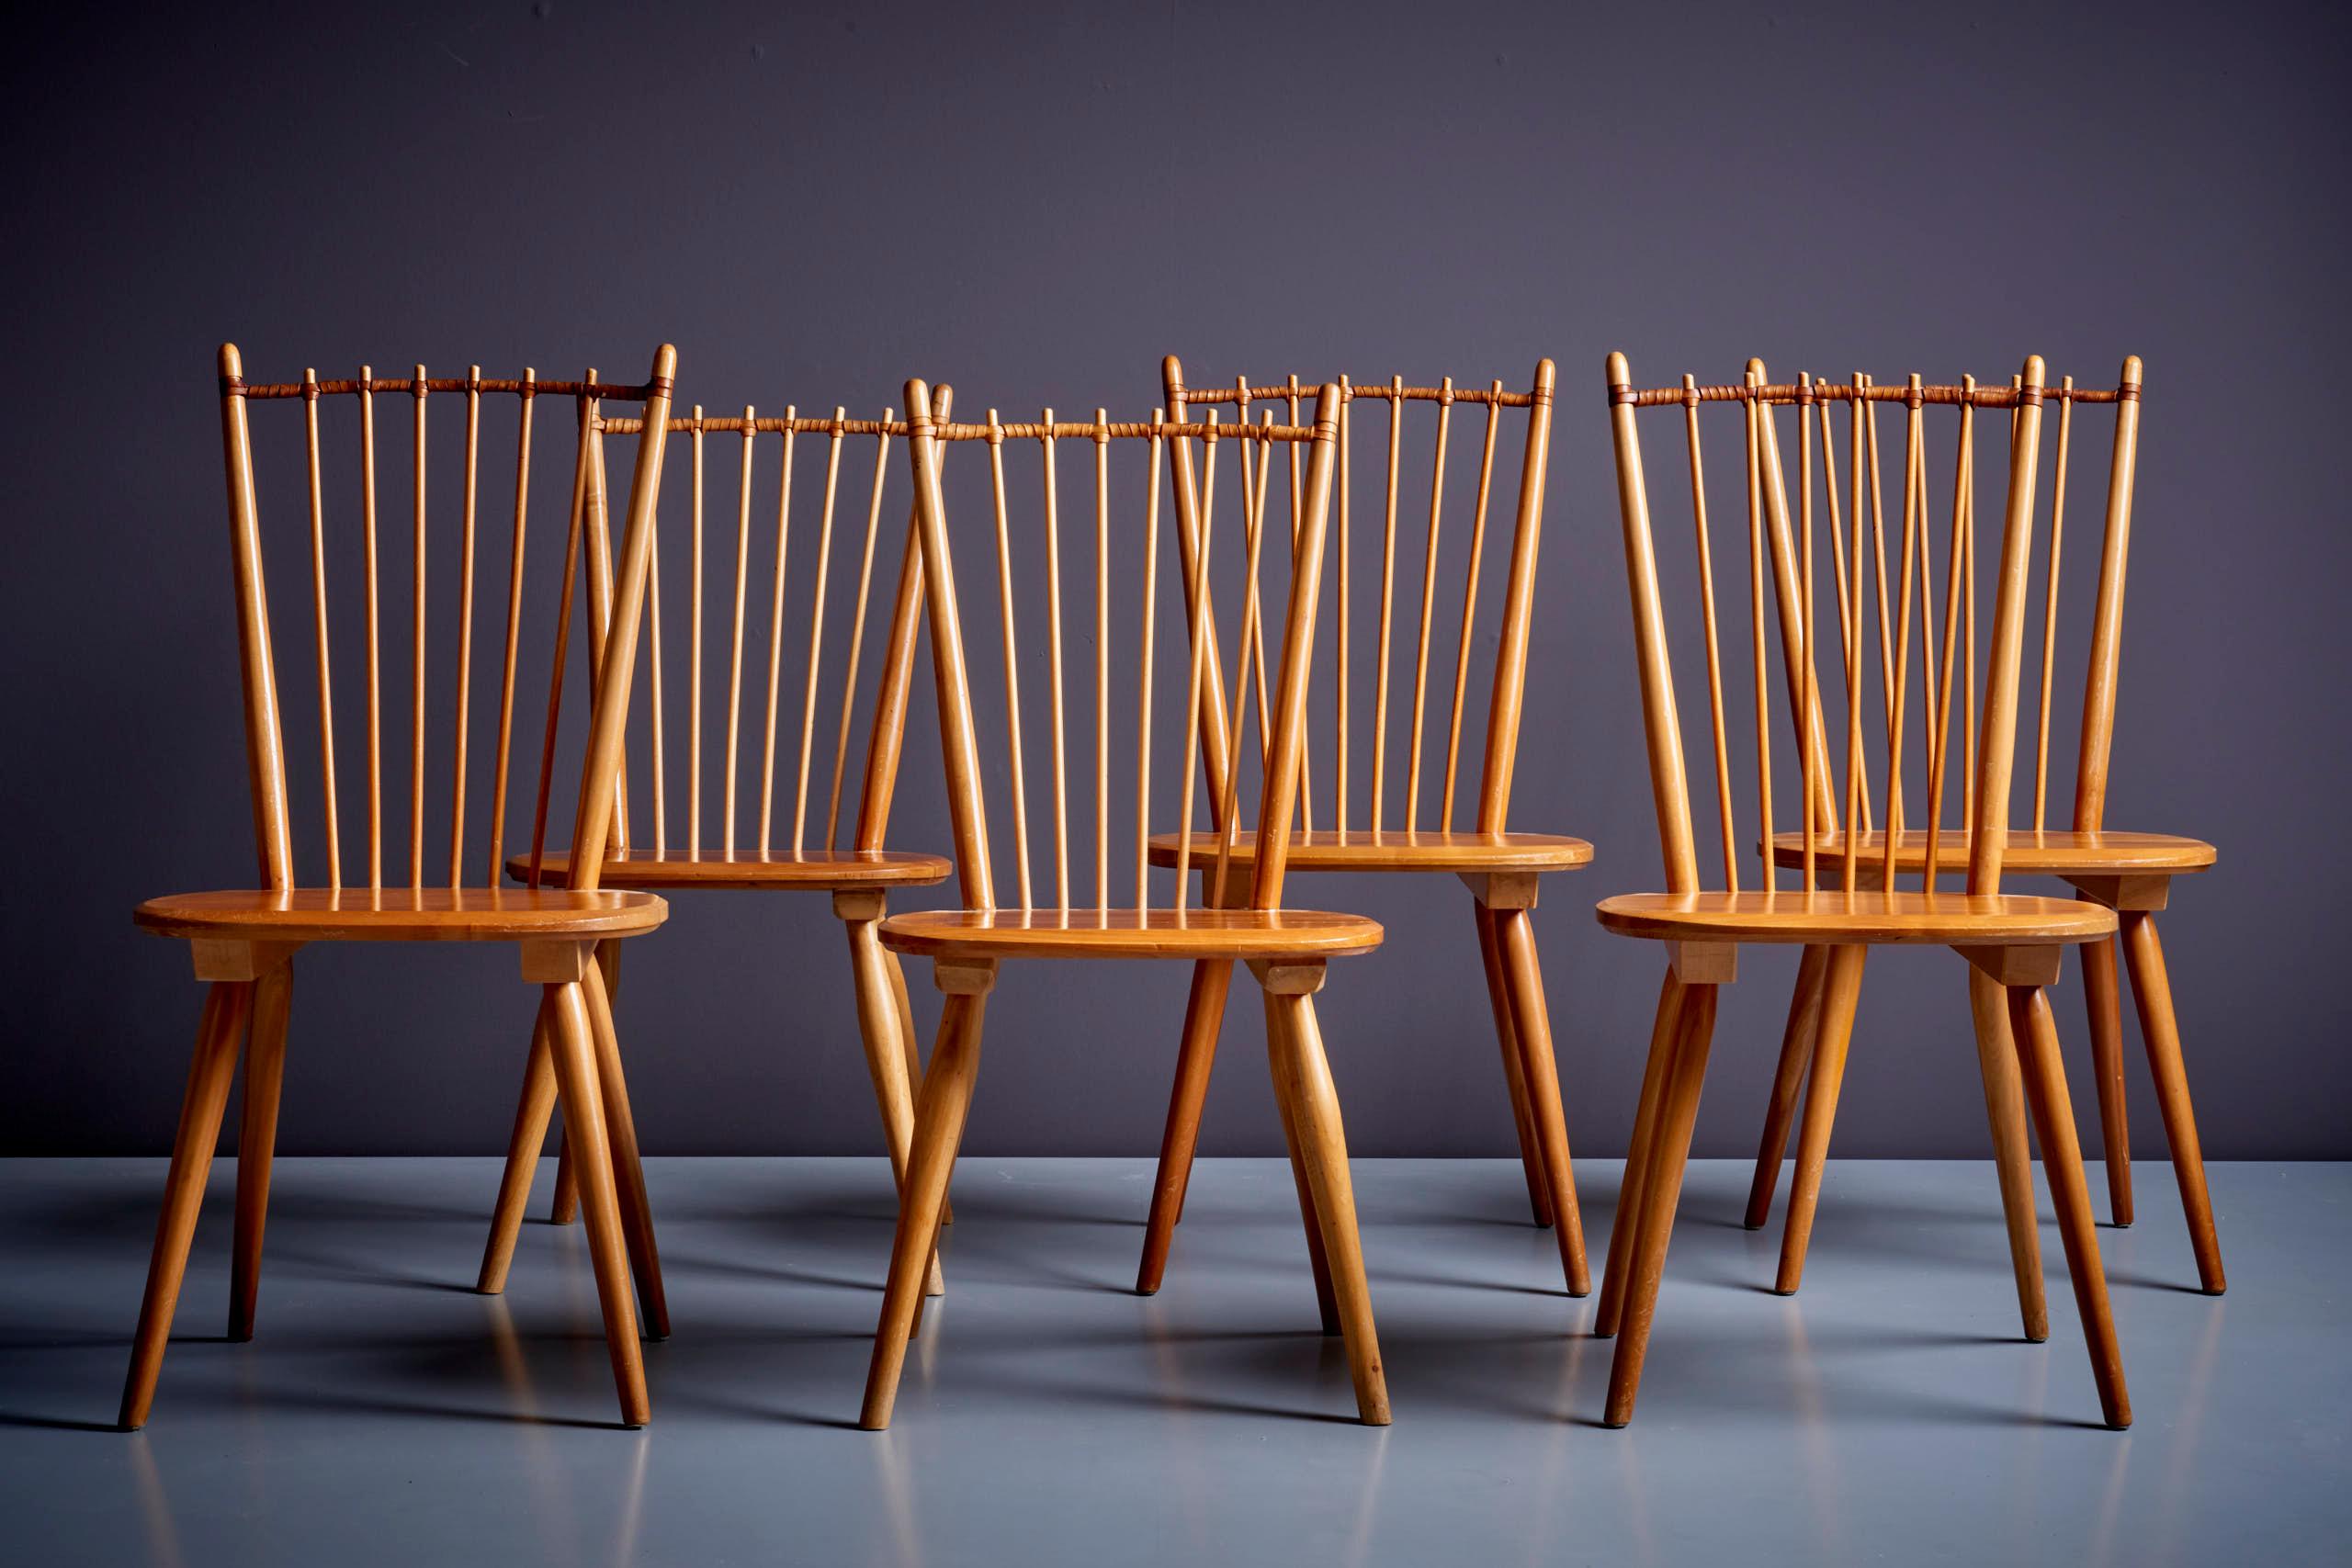 Set of 6 wooden dining chairs, designed in 1950s by Albert Haberer and manufactured by Hermann Fleiner.
Beautiful detail is the leather connection between the spindles that also gives the backrest both strength and flexibility. Architectural Arts &